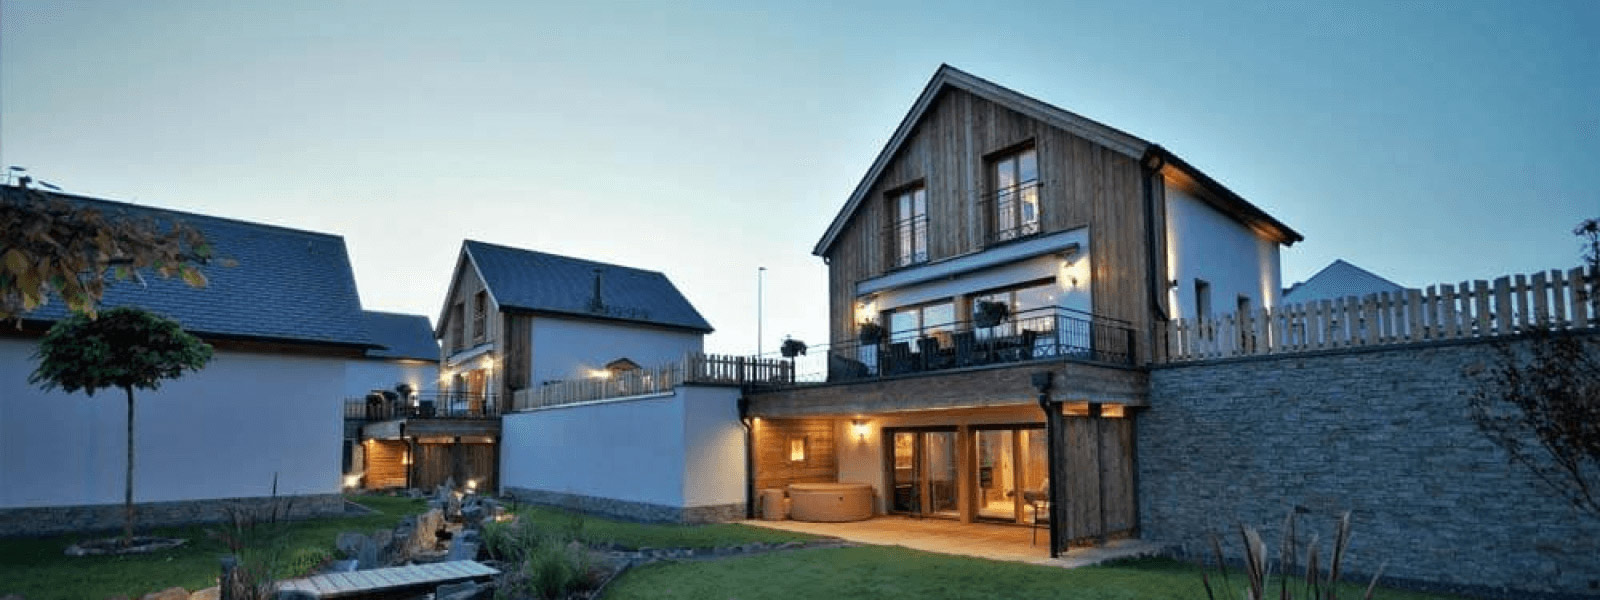 Chalets Petry - Chalet Moselle